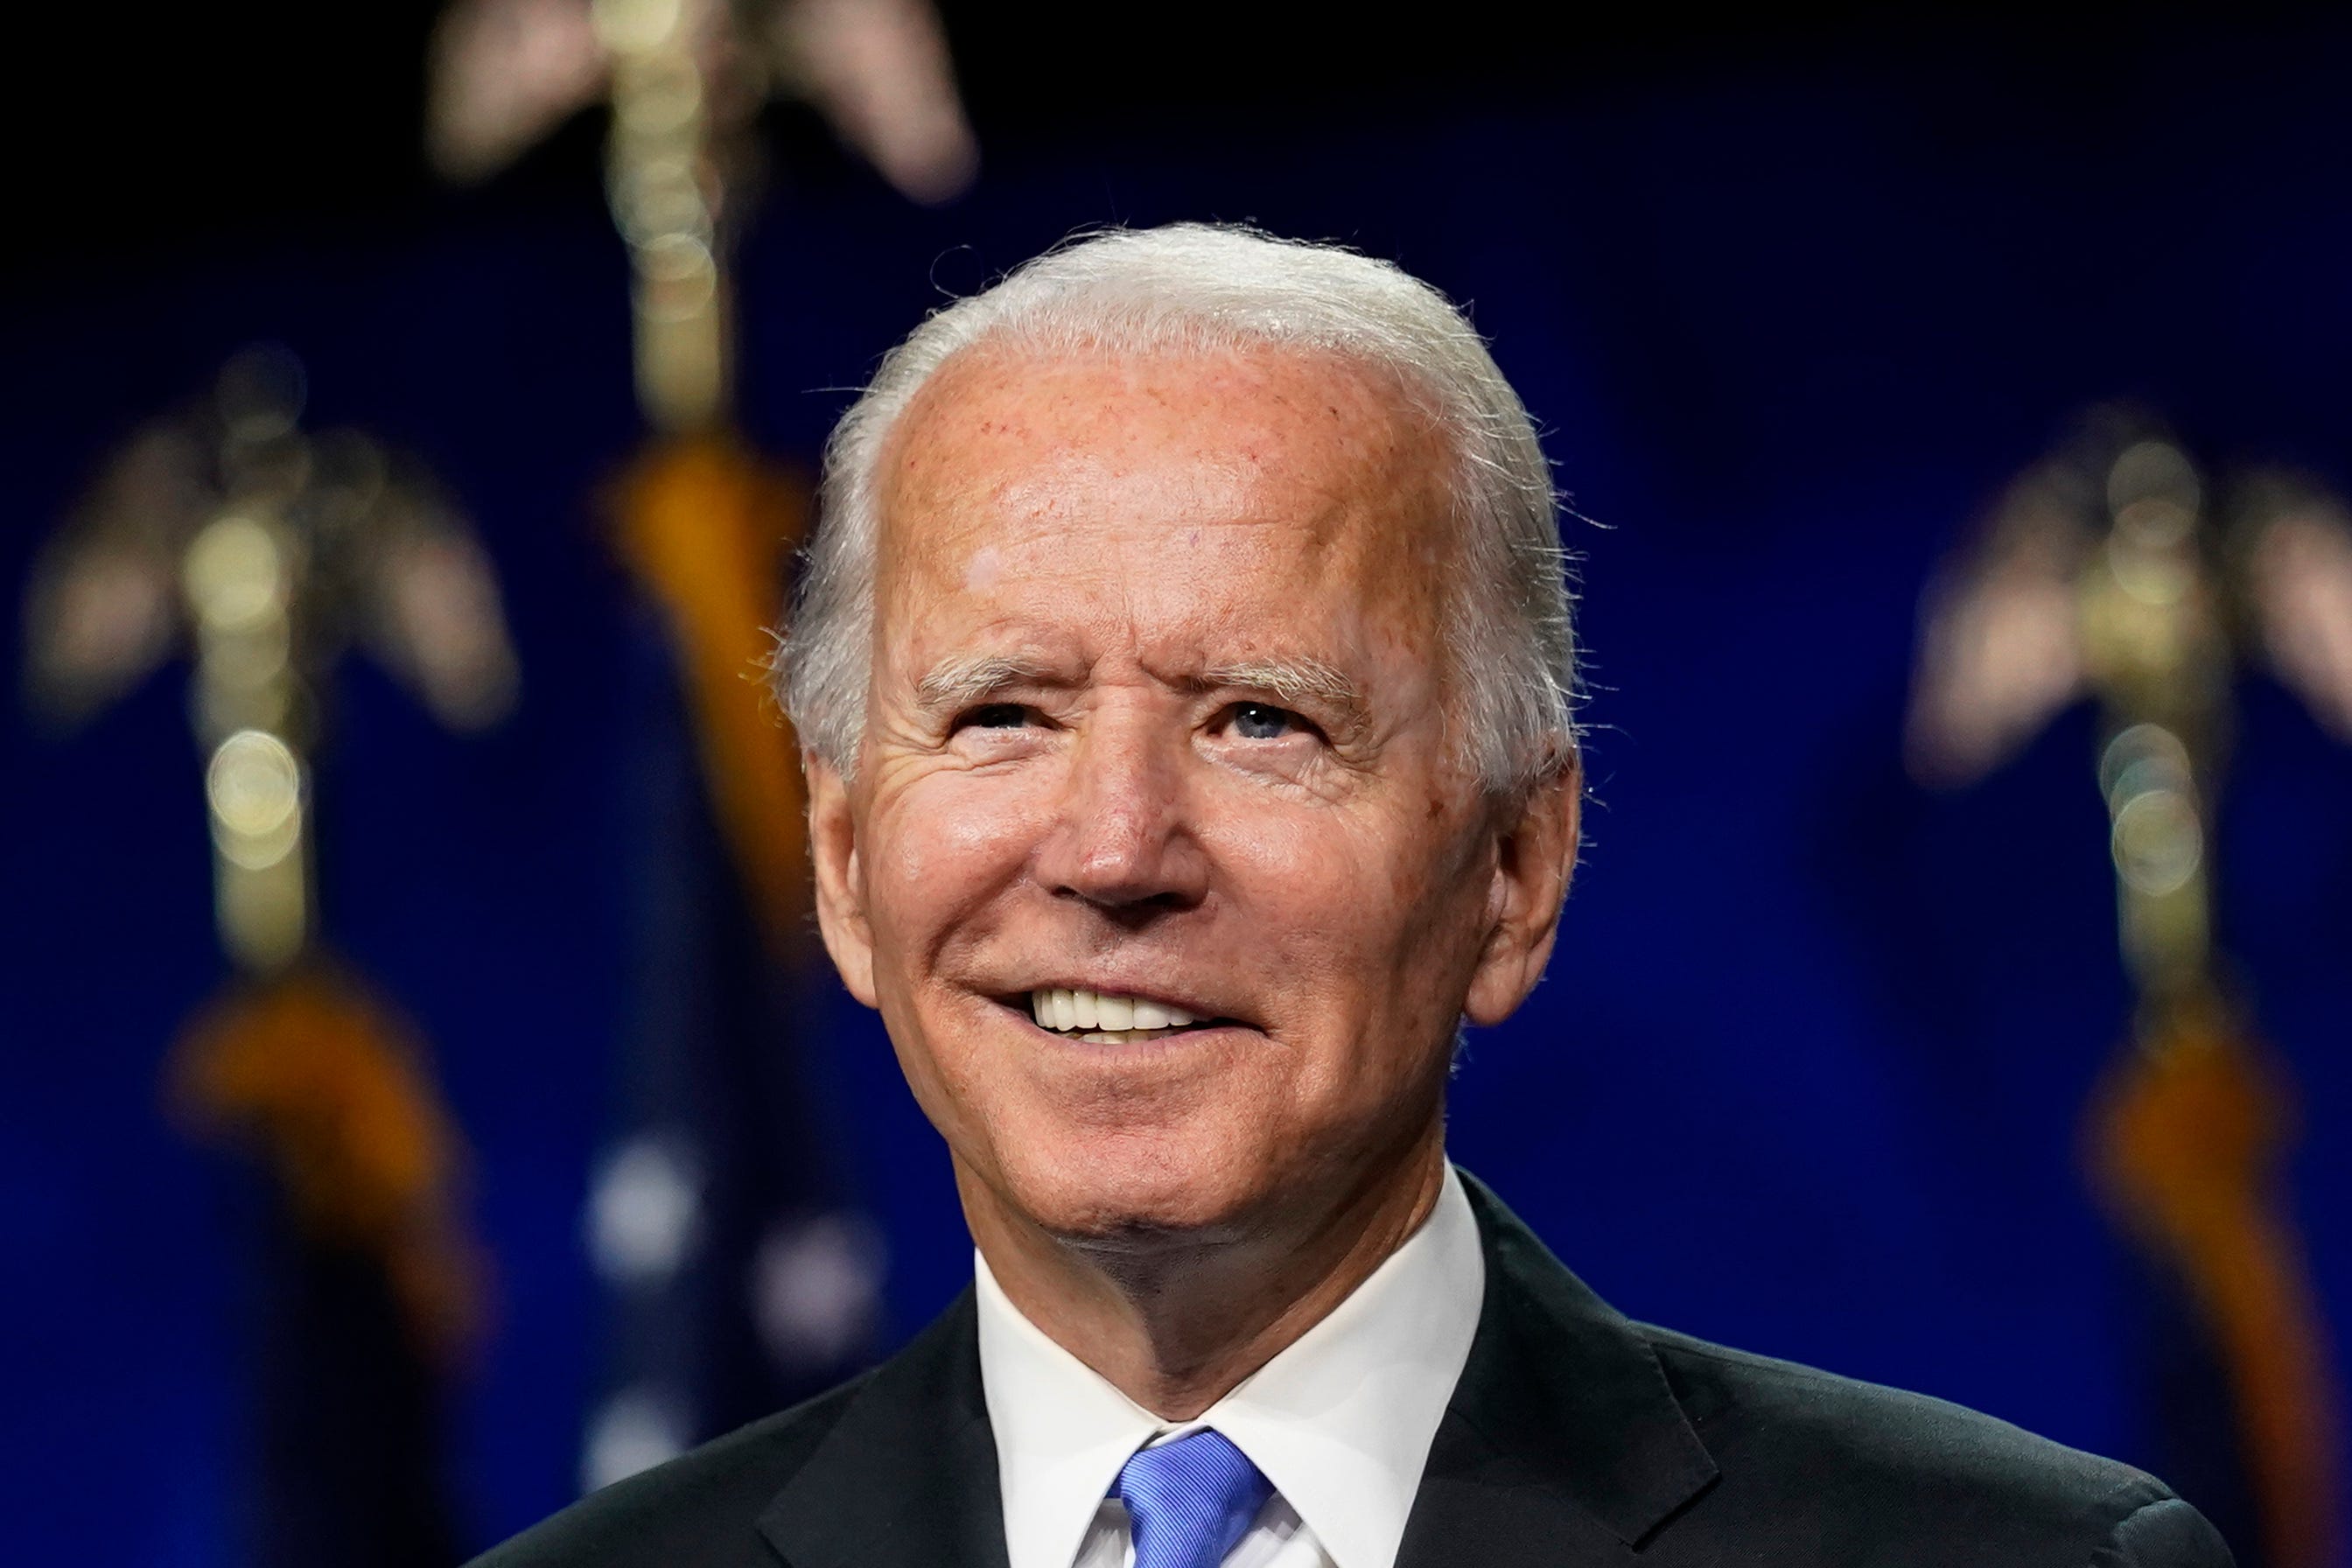 joe biden tested - Biden|President|Joe|States|Delaware|Obama|Vice|Senate|Campaign|Election|Time|Administration|House|Law|People|Years|Family|Year|Trump|School|University|Senator|Office|Party|Country|Committee|Act|War|Days|Climate|Hunter|Health|America|State|Day|Democrats|Americans|Documents|Care|Plan|United States|Vice President|White House|Joe Biden|Biden Administration|Democratic Party|Law School|Presidential Election|President Joe Biden|Executive Orders|Foreign Relations Committee|Presidential Campaign|Second Term|47Th Vice President|Syracuse University|Climate Change|Hillary Clinton|Last Year|Barack Obama|Joseph Robinette Biden|U.S. Senator|Health Care|U.S. Senate|Donald Trump|President Trump|President Biden|Federal Register|Judiciary Committee|Presidential Nomination|Presidential Medal